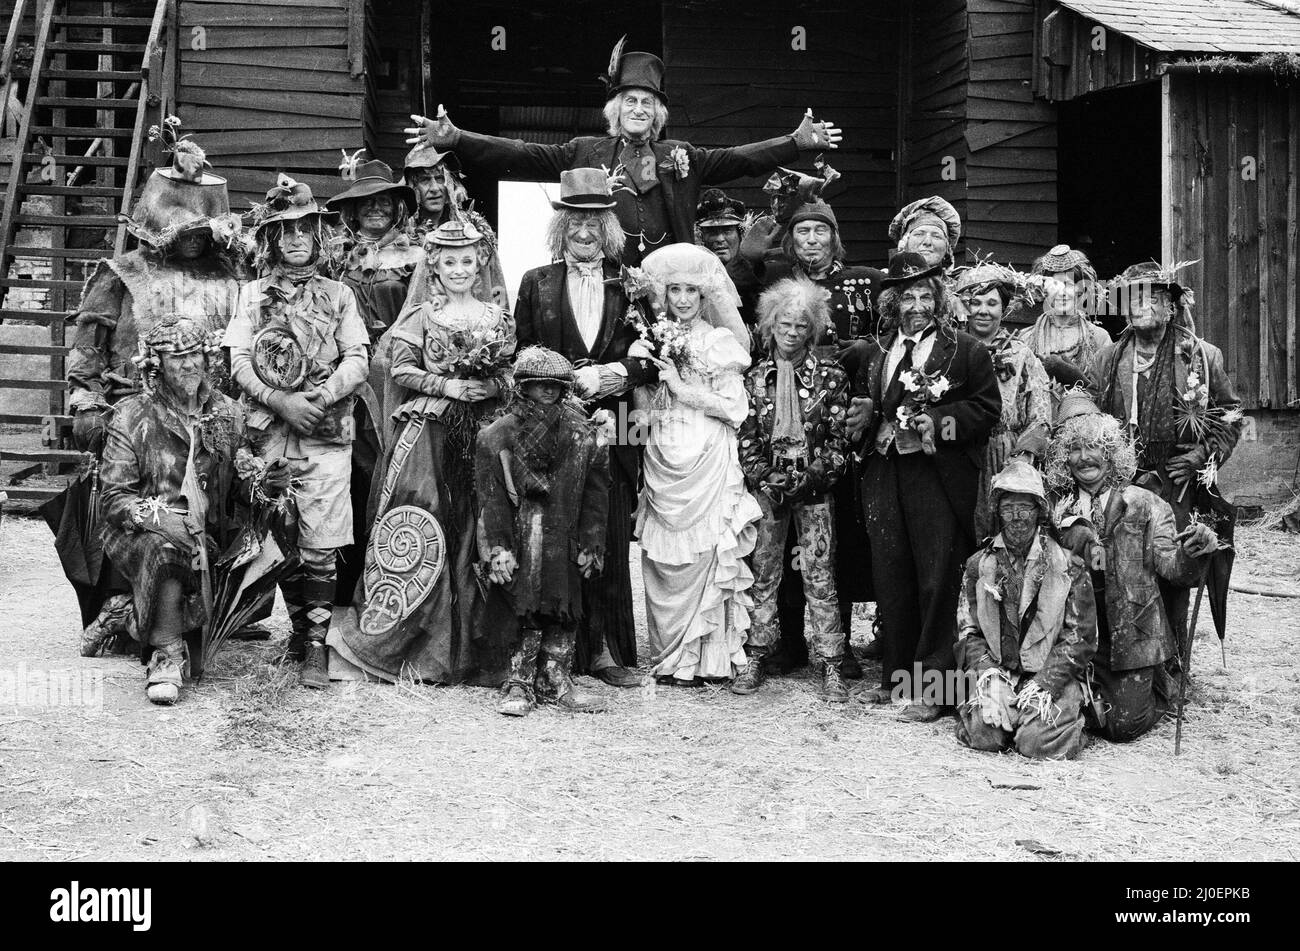 Television character Worzel Gummidge who is played by Jon Pertwee marries his Aunt Sally, played by Una Stubbs, in a barn at Braishfield, near Romsey, Hants. The guests at the wedding included Barbara Windsor, Bill Maynard with several scarecrows. 3rd July 1979. Stock Photo